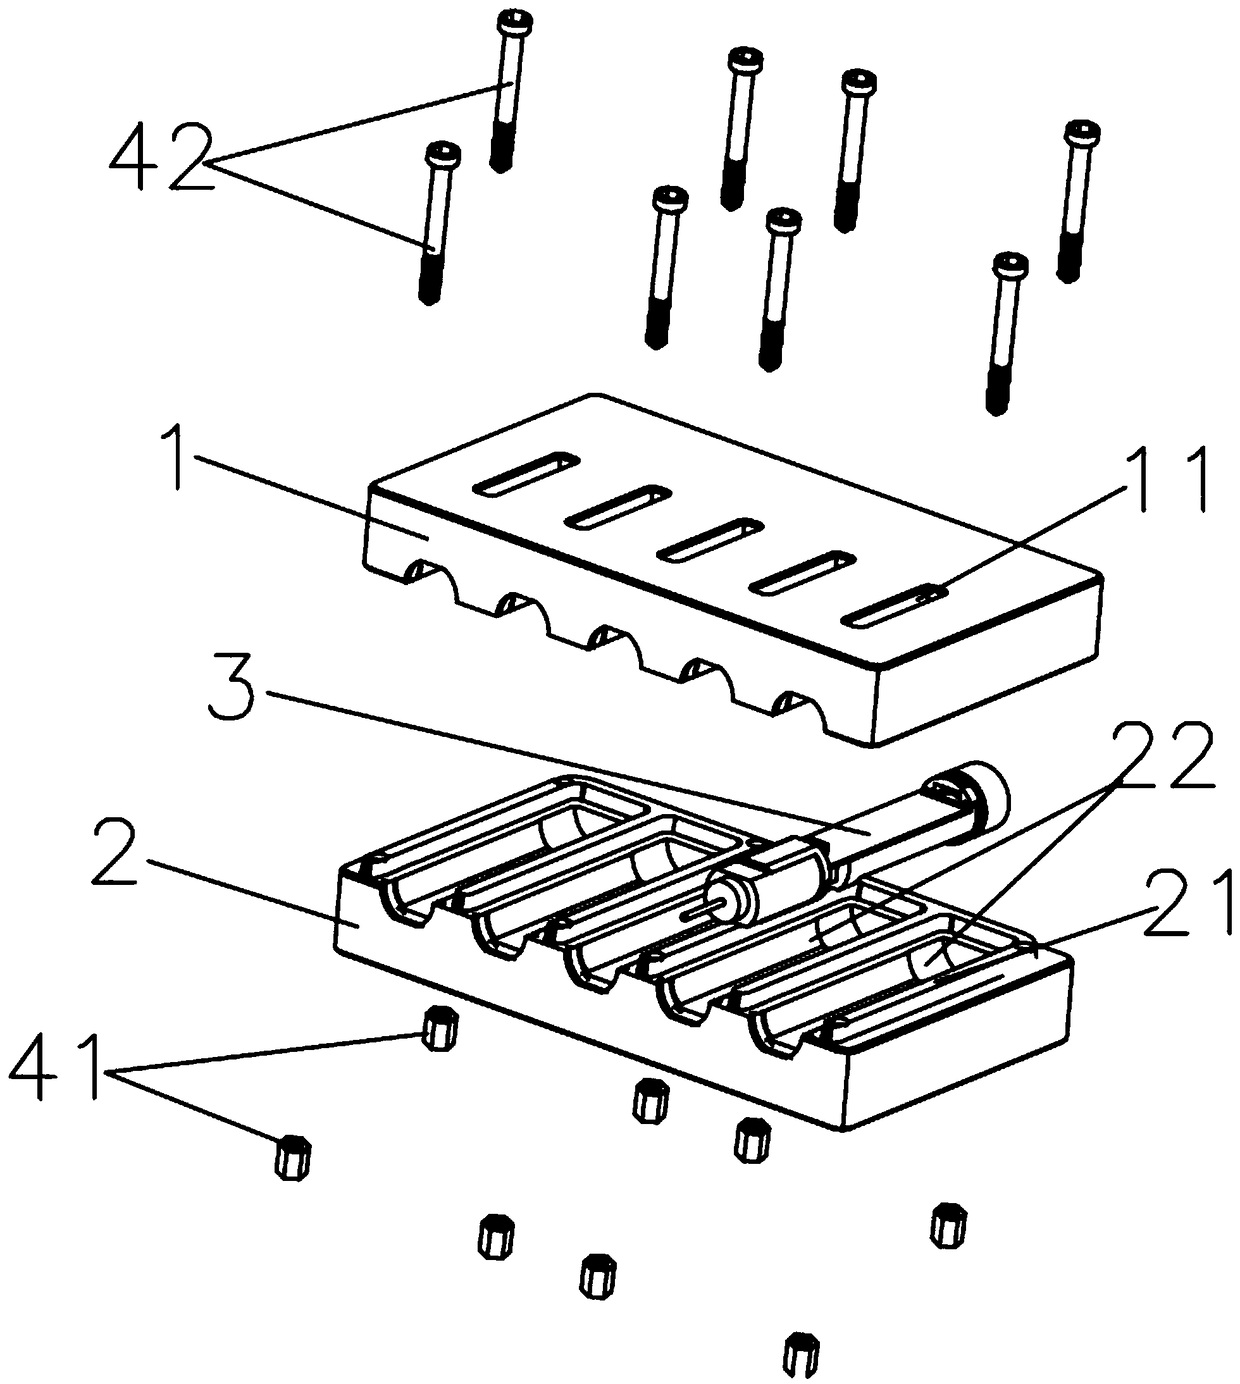 A potting jig for an electric toothbrush and a potting method for an electric toothbrush